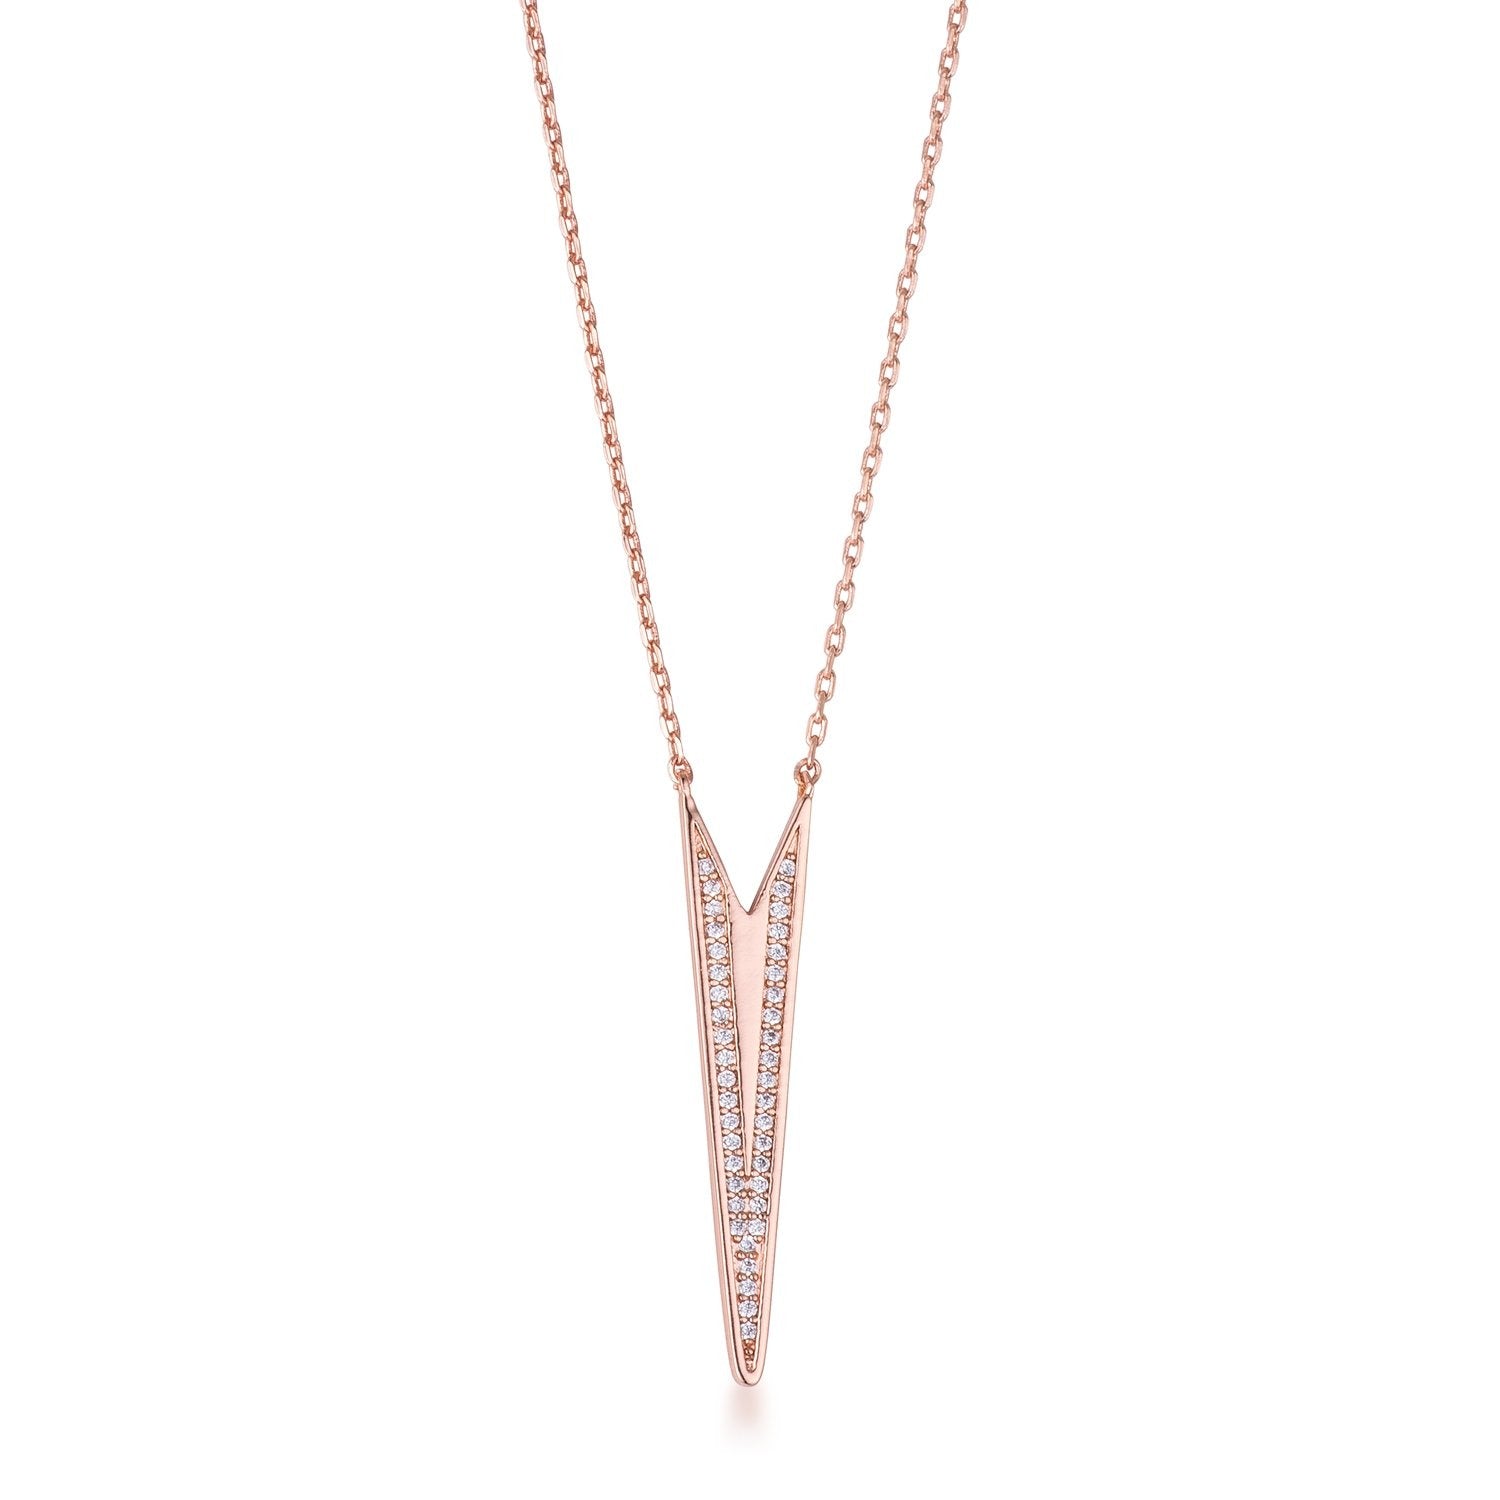 .2Ct Rose Gold Plated CZ Embedded Elongated Arrow Necklace freeshipping - Higher Class Elegance